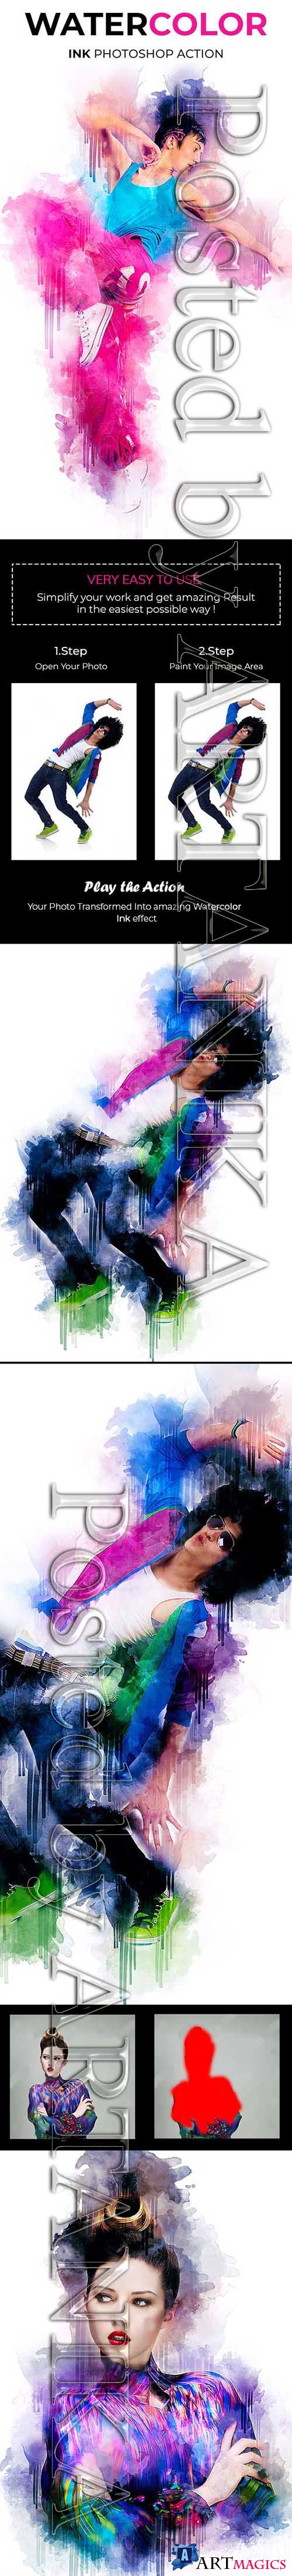 GraphicRiver - Watercolor Ink Photoshop Action 21189387